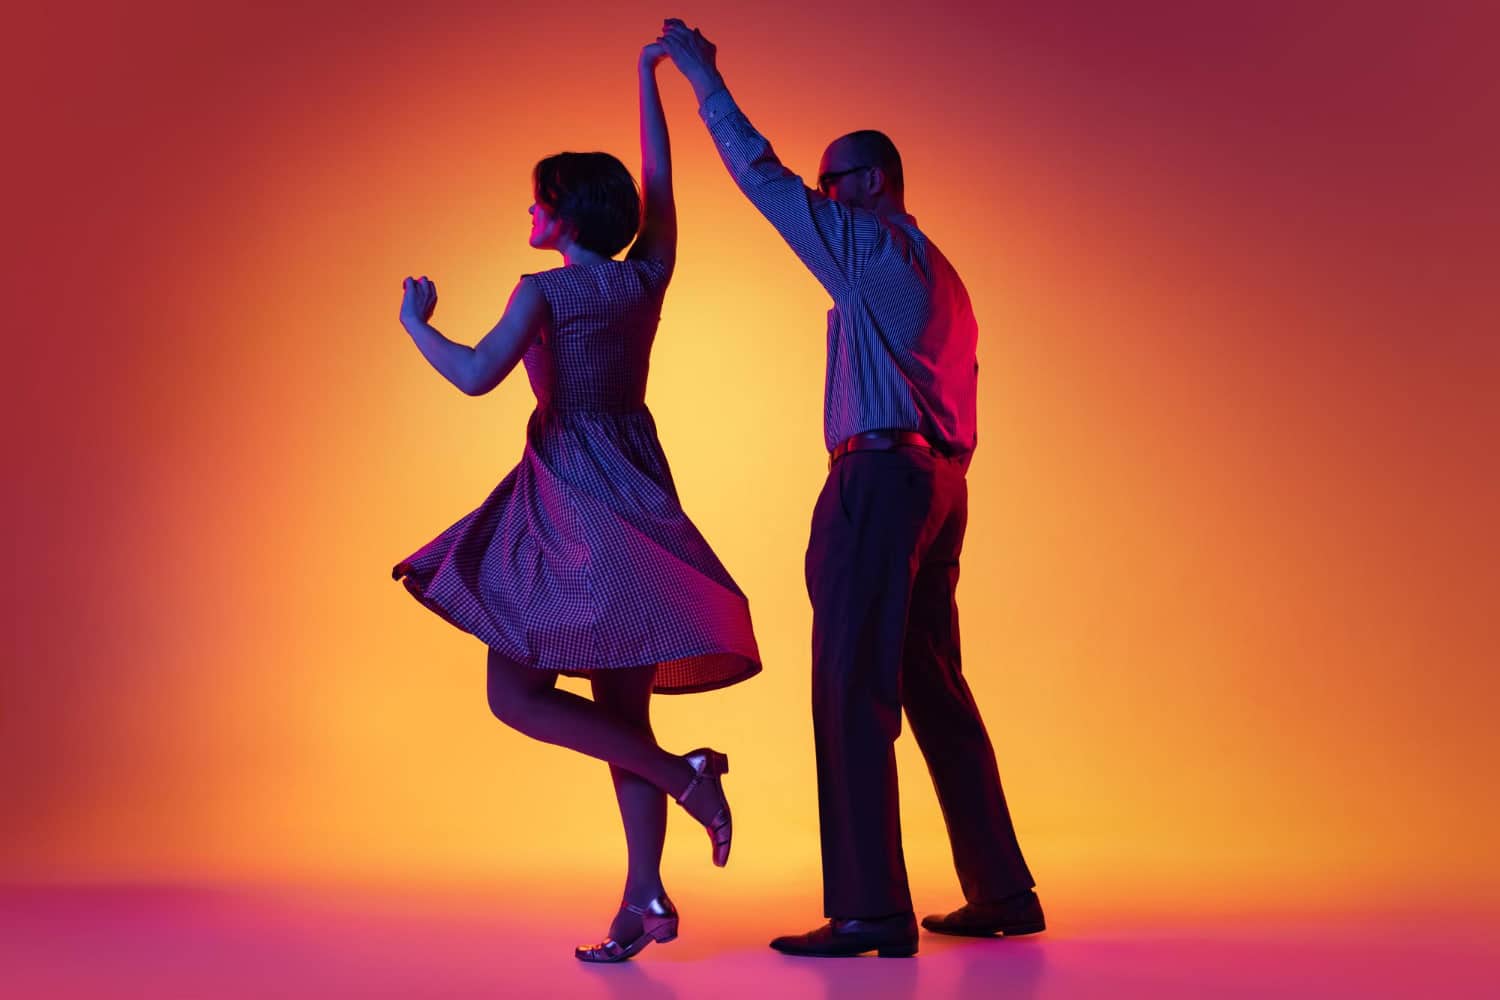 kompr portrait of artistic couple dancing retro style dance isolated over gradient orange yellow background in neon light